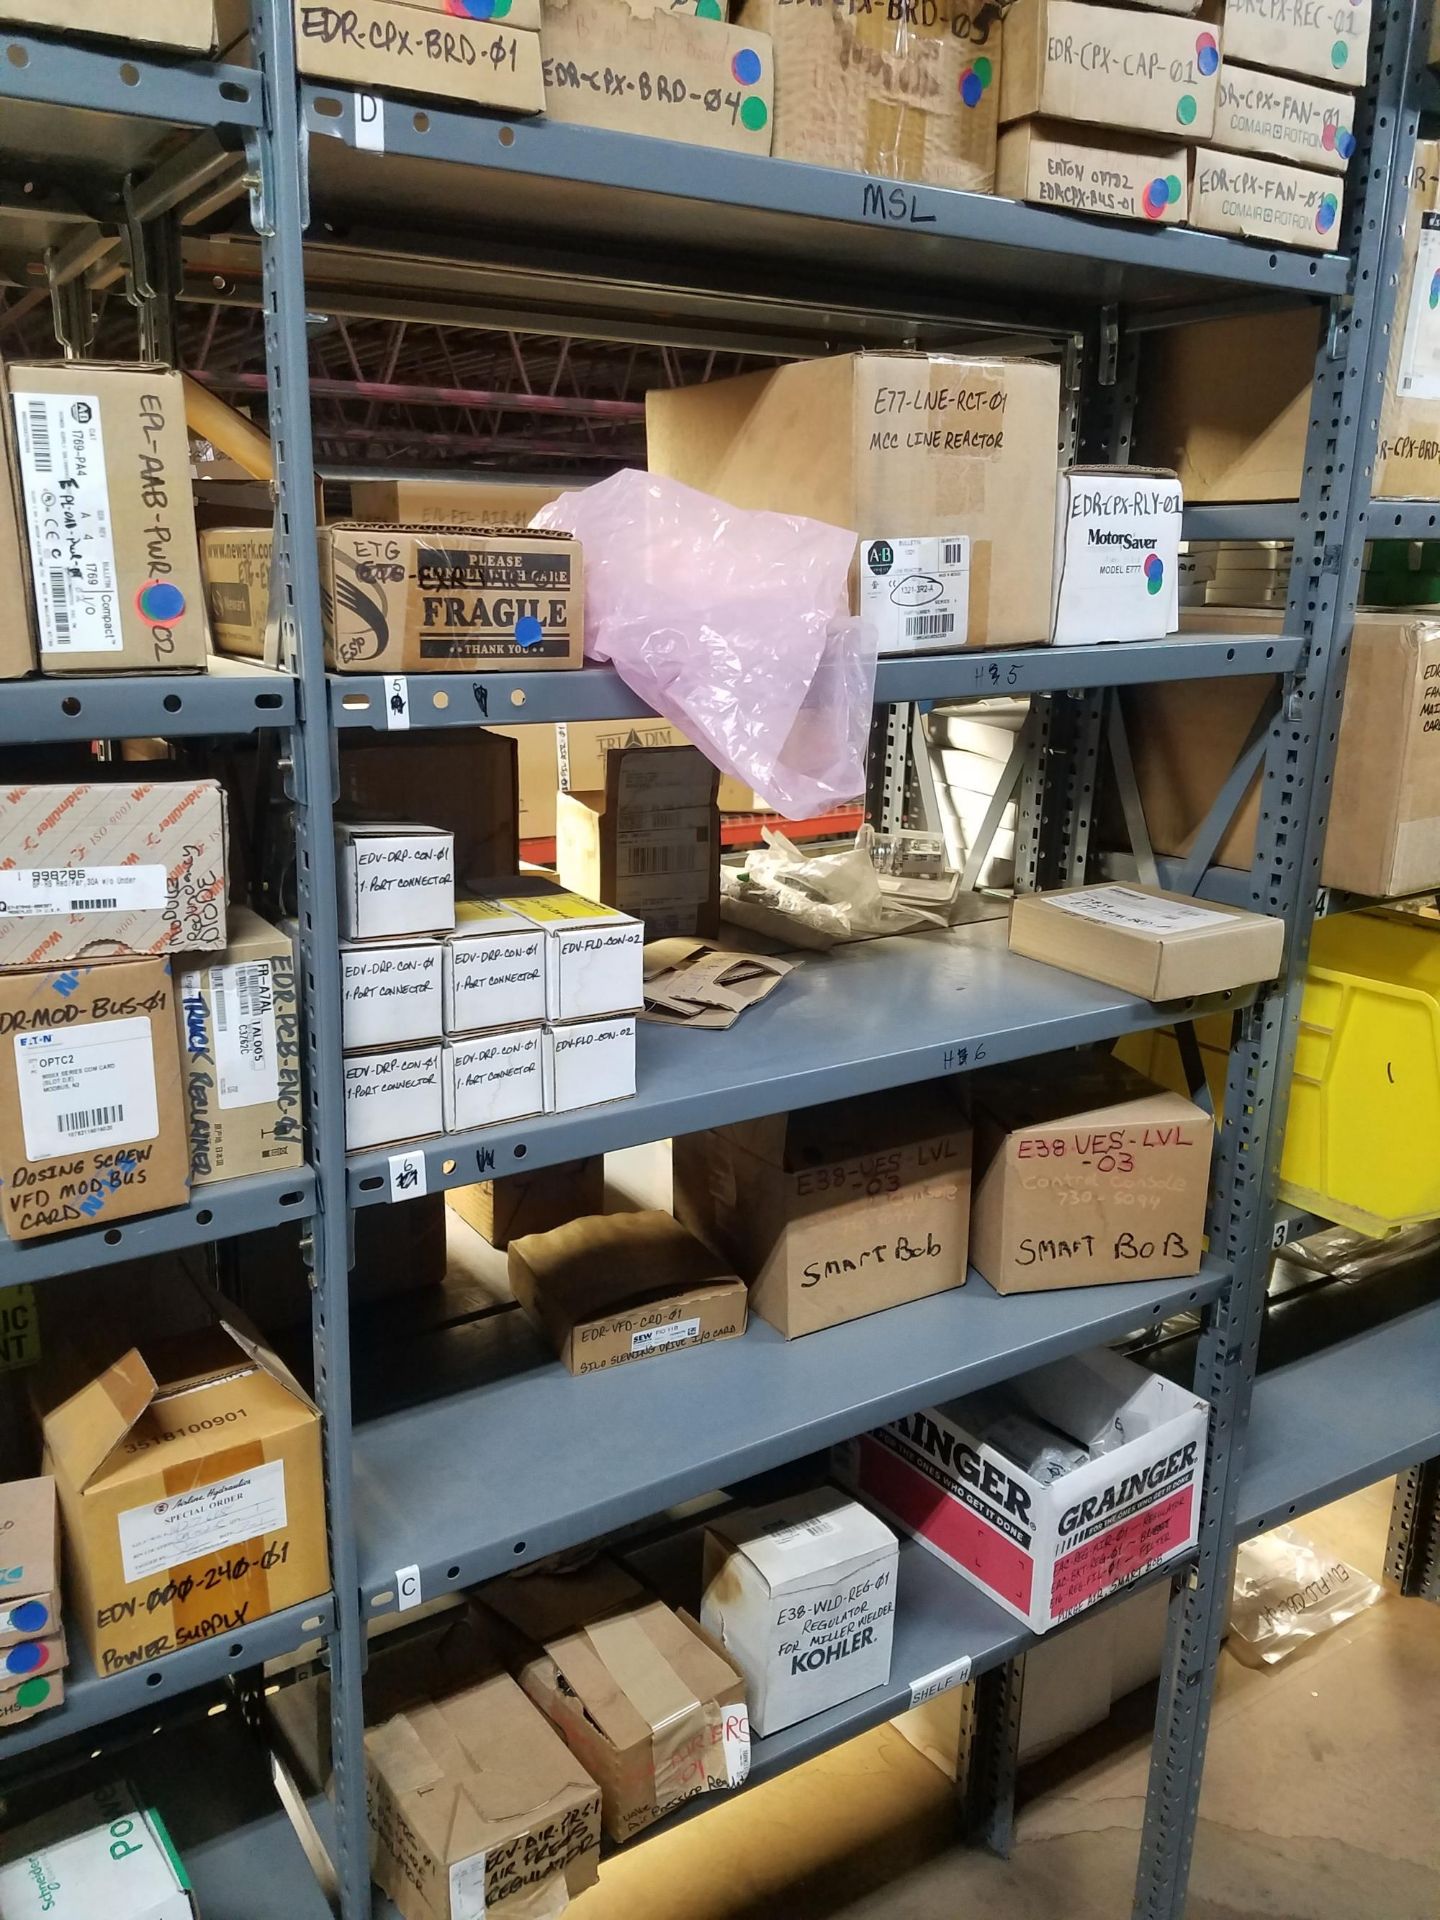 Contents of Spare Parts Storage Area On Mezzanine | Rig Fee: $400 - Image 4 of 19